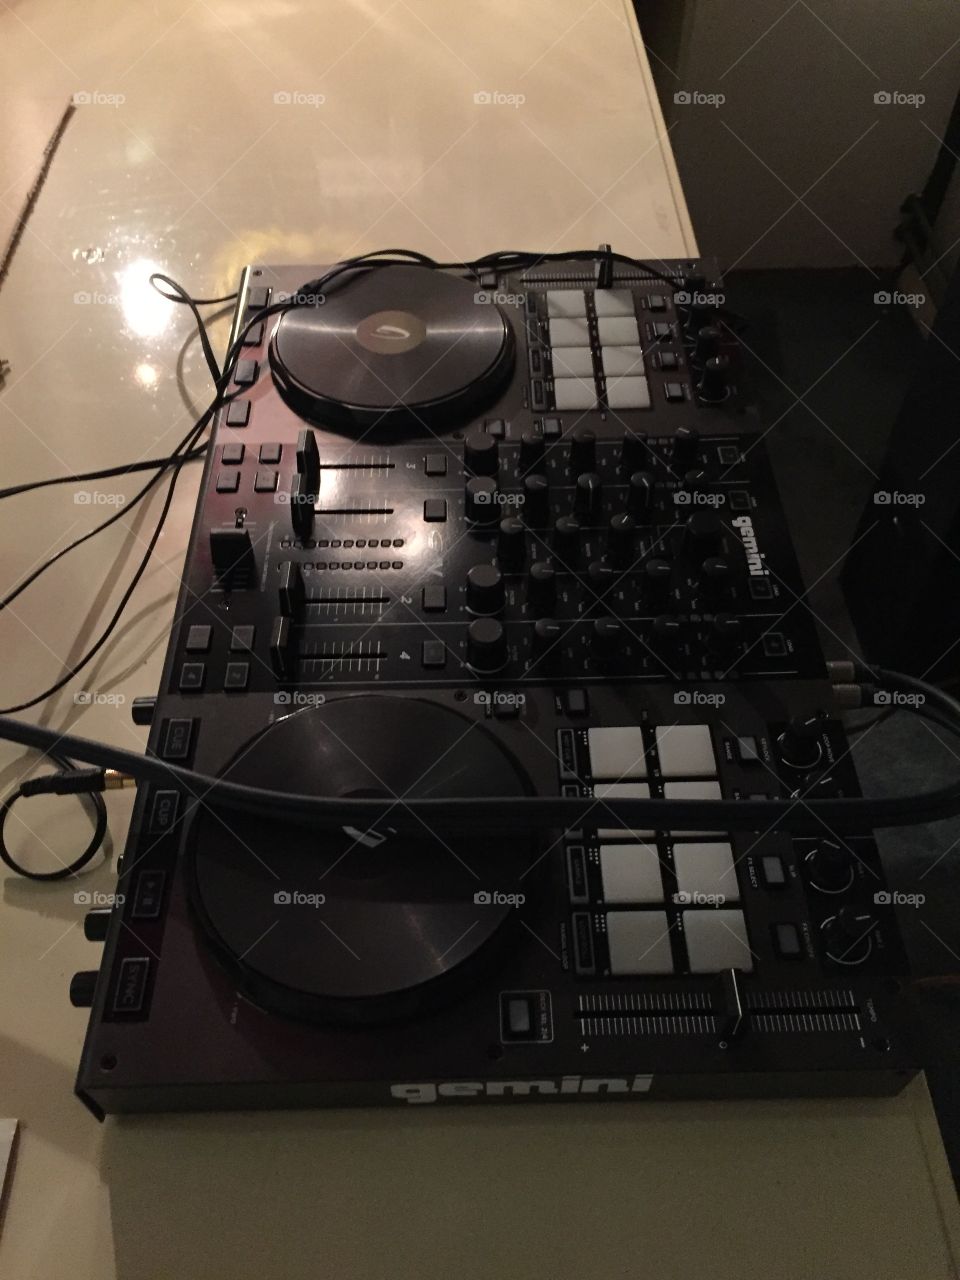 I was just starting up with my new dj controller
